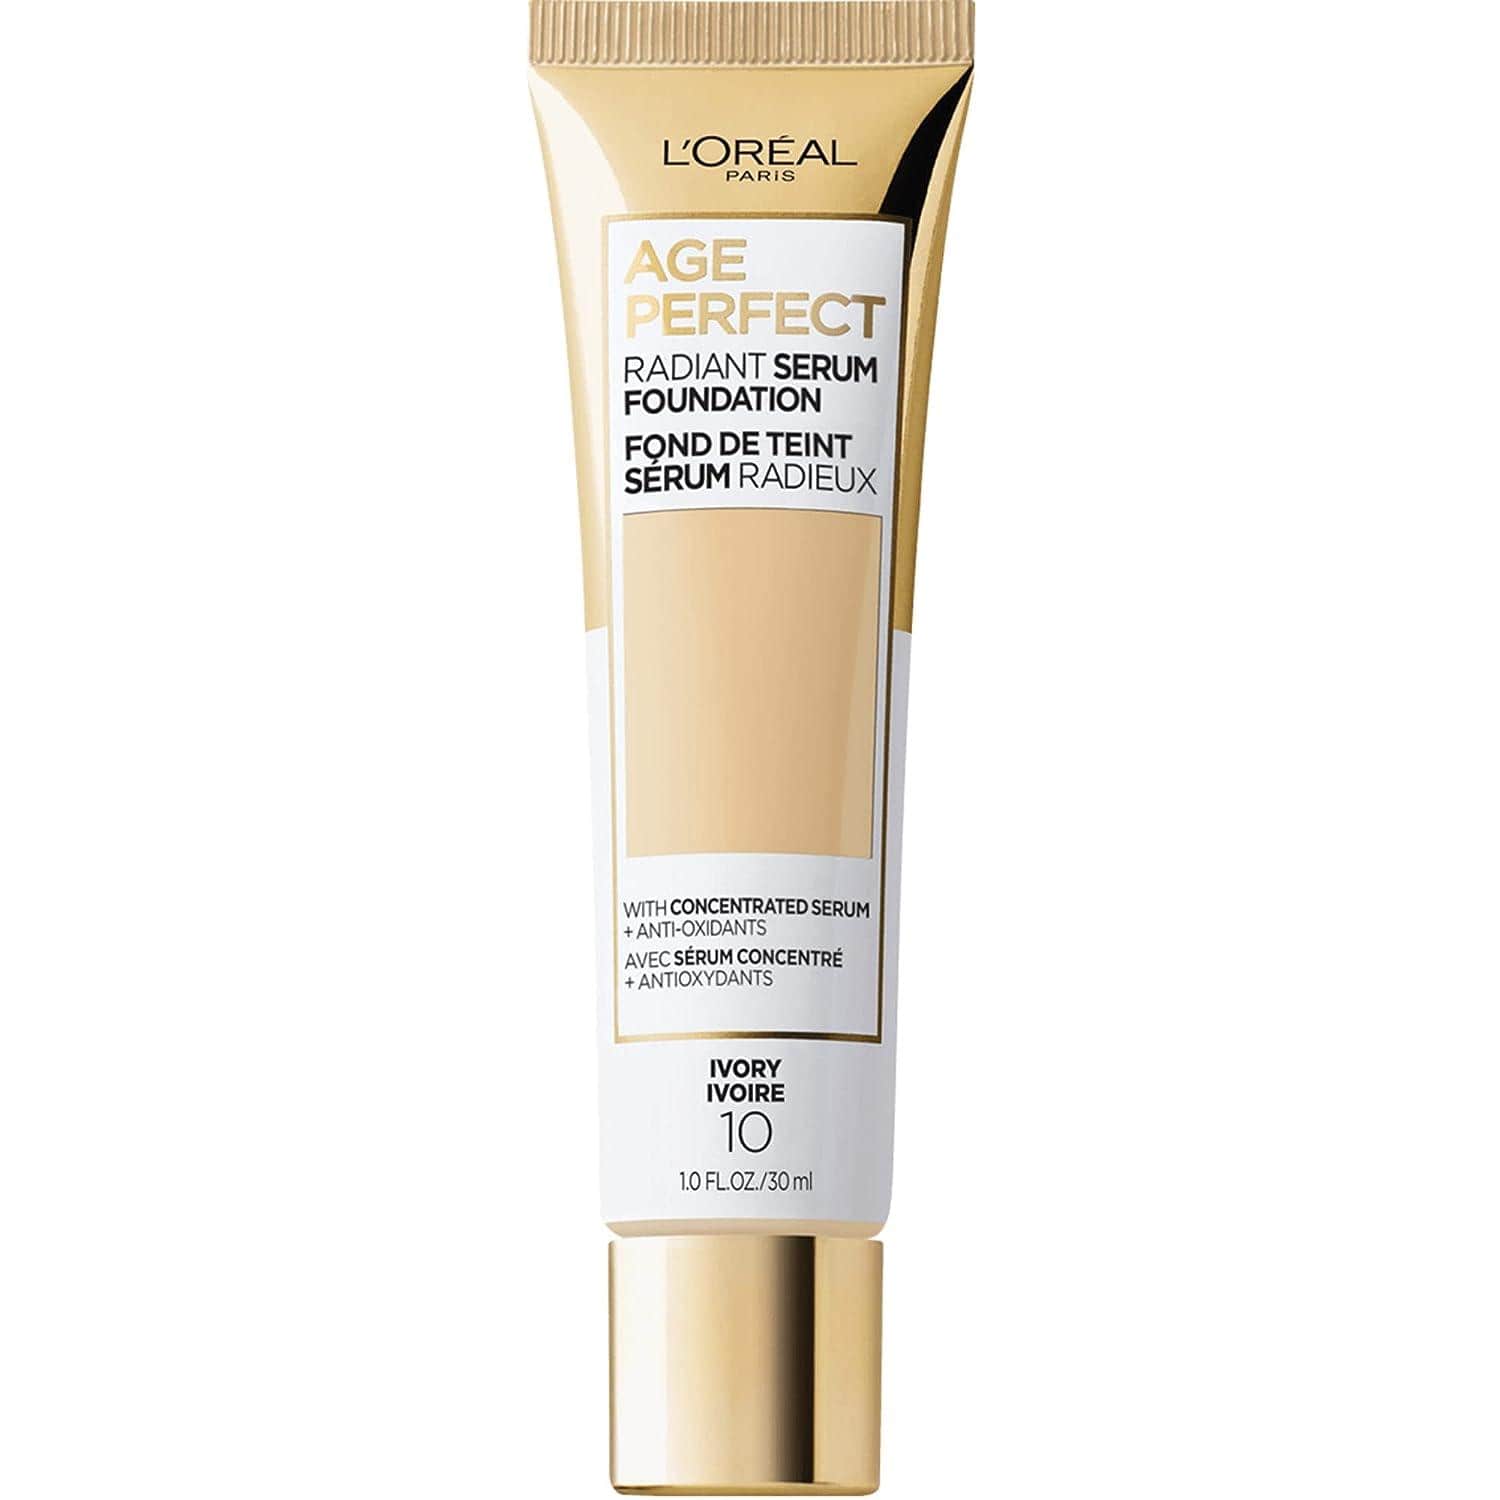 L'Oréal Paris Age Perfect Radiant Serum Foundation: a budget-friendly gem for mature skin, blending hyaluronic acid, niacinamide, and SPF 50. It tackles mature skin concerns without settling into lines, offering affordable awesomeness for flawless makeup. 